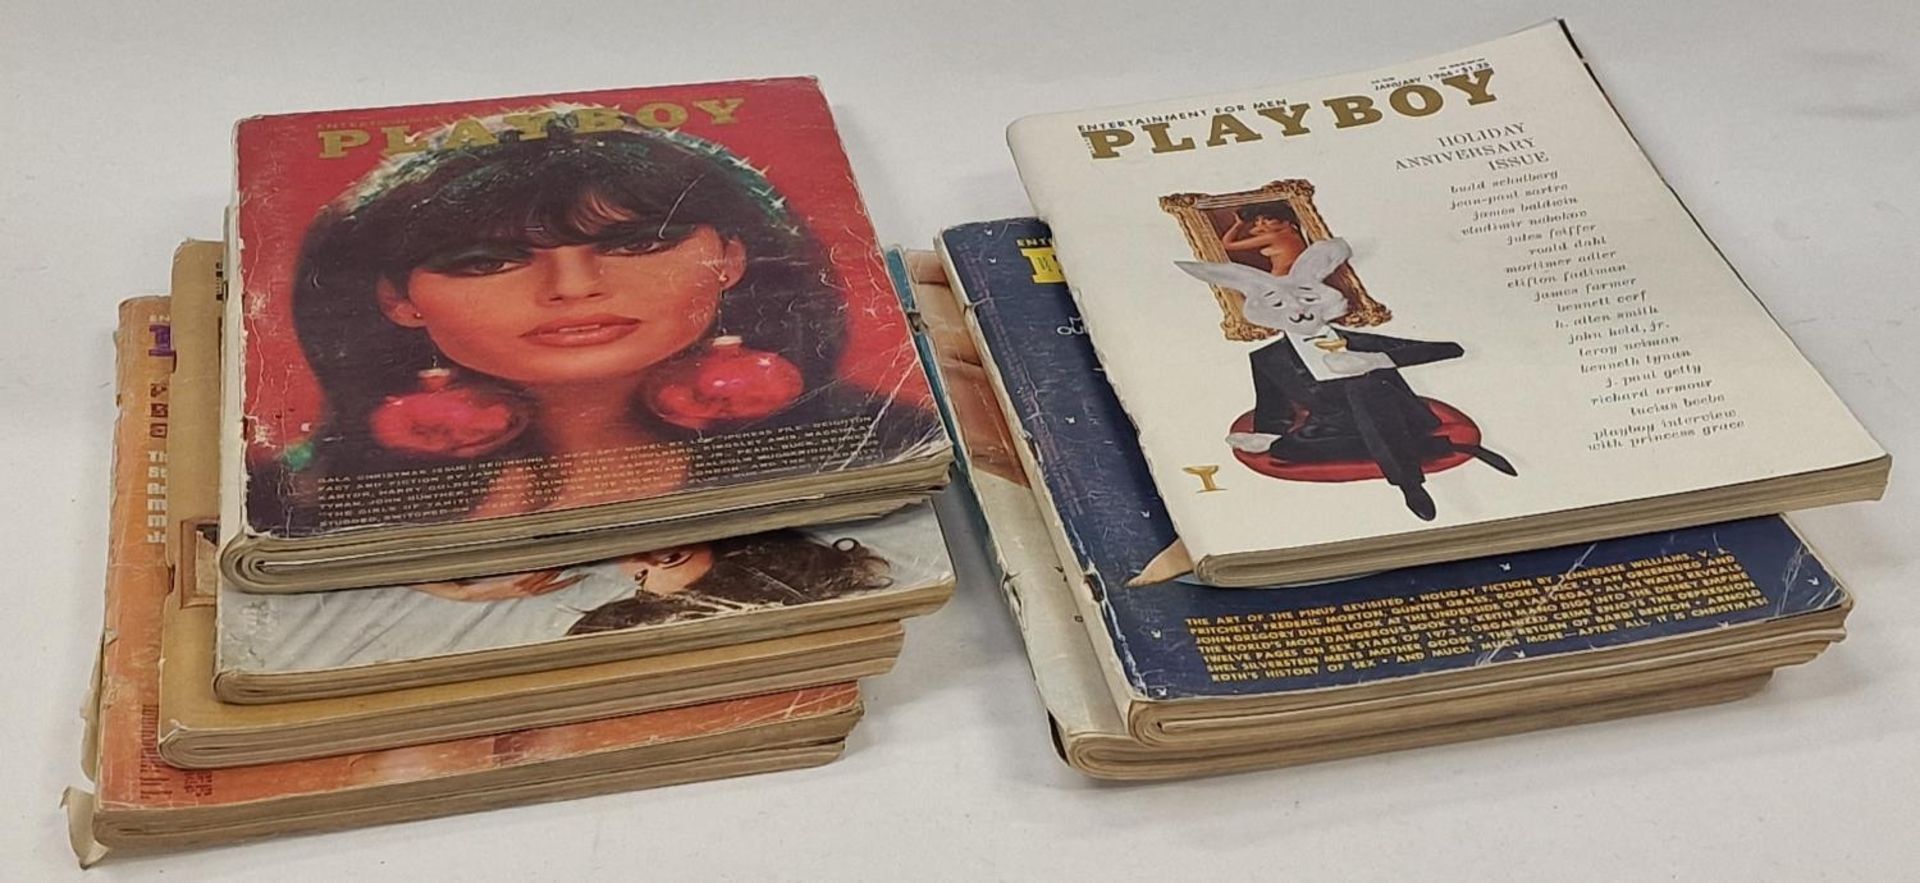 Collection of vintage Playboy adult magazines from the 1960's and 1970's. Total 7 in lot.